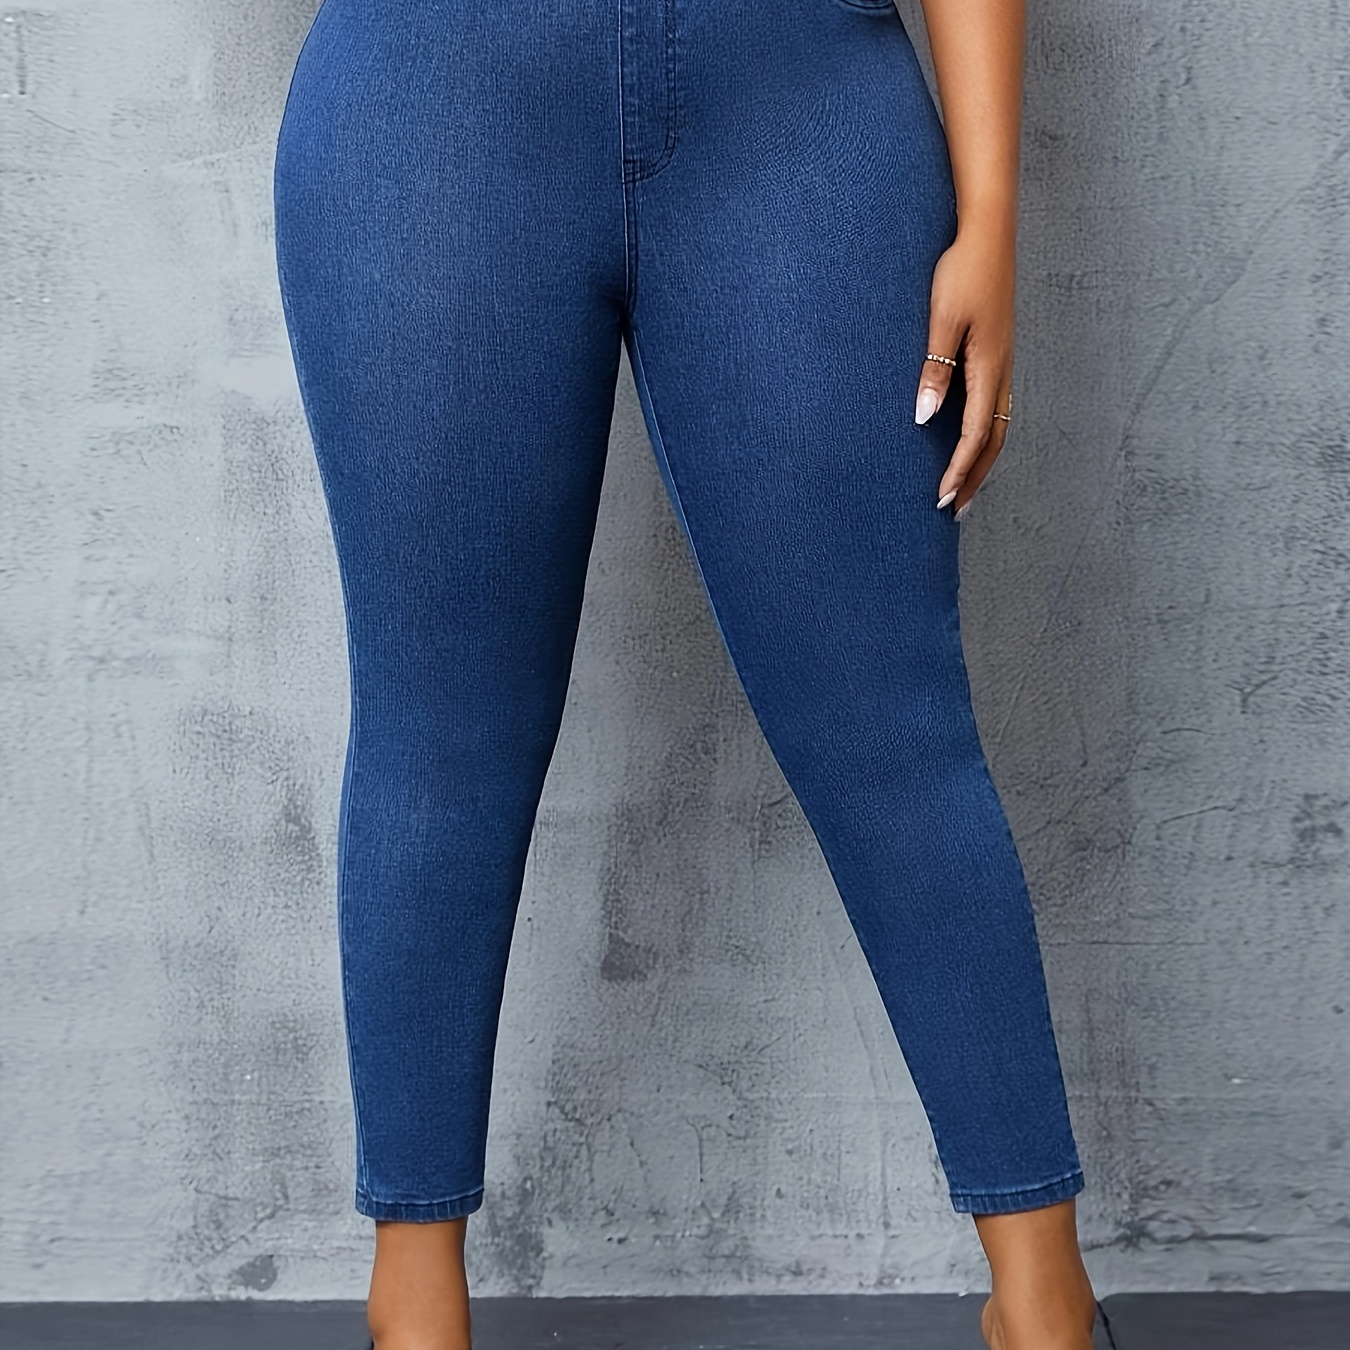 

High-waisted Elastic Skinny Jeans, Plain Washed Blue Slim Fit Denim Pants, Elegant Style, Stretchable Ankle-length Trousers For Women